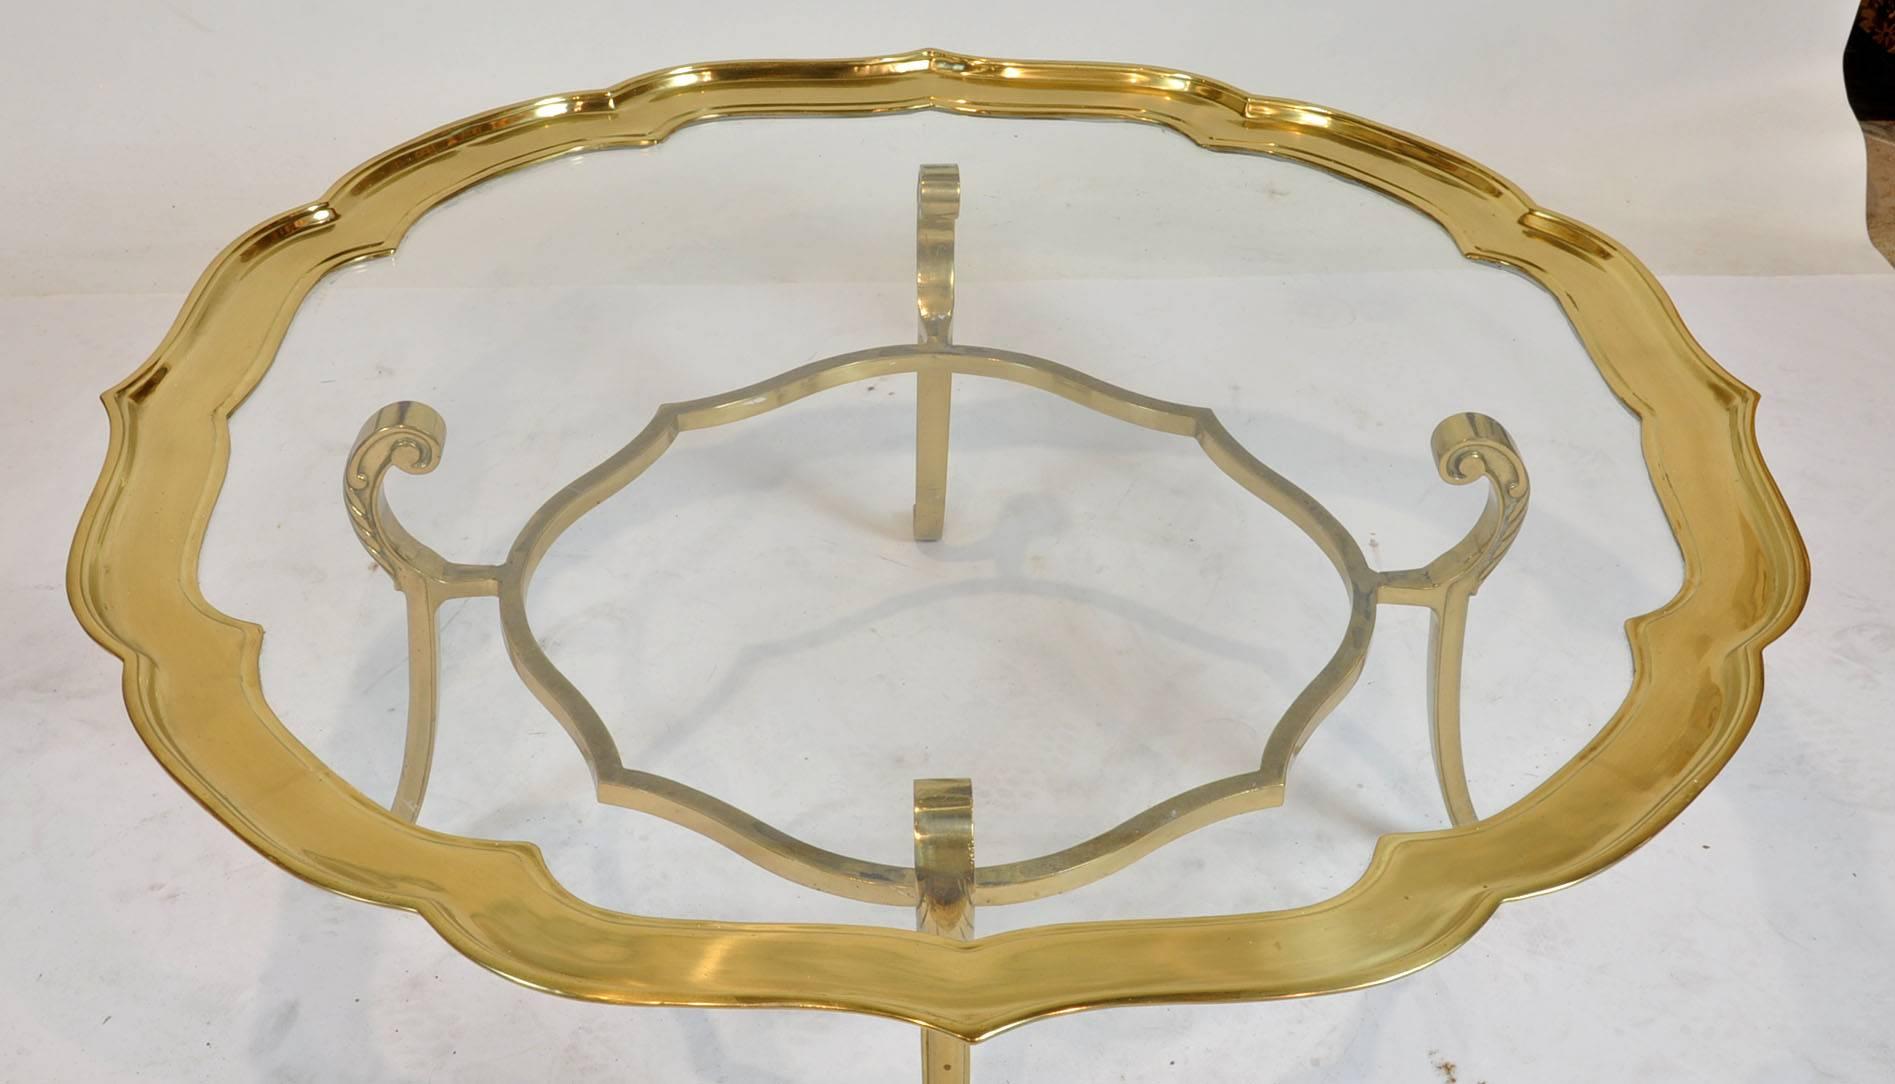 Hollywood Regency Vintage Mid-Century Scalloped Glass Top Brass Coffee Table with Scrolled Legs